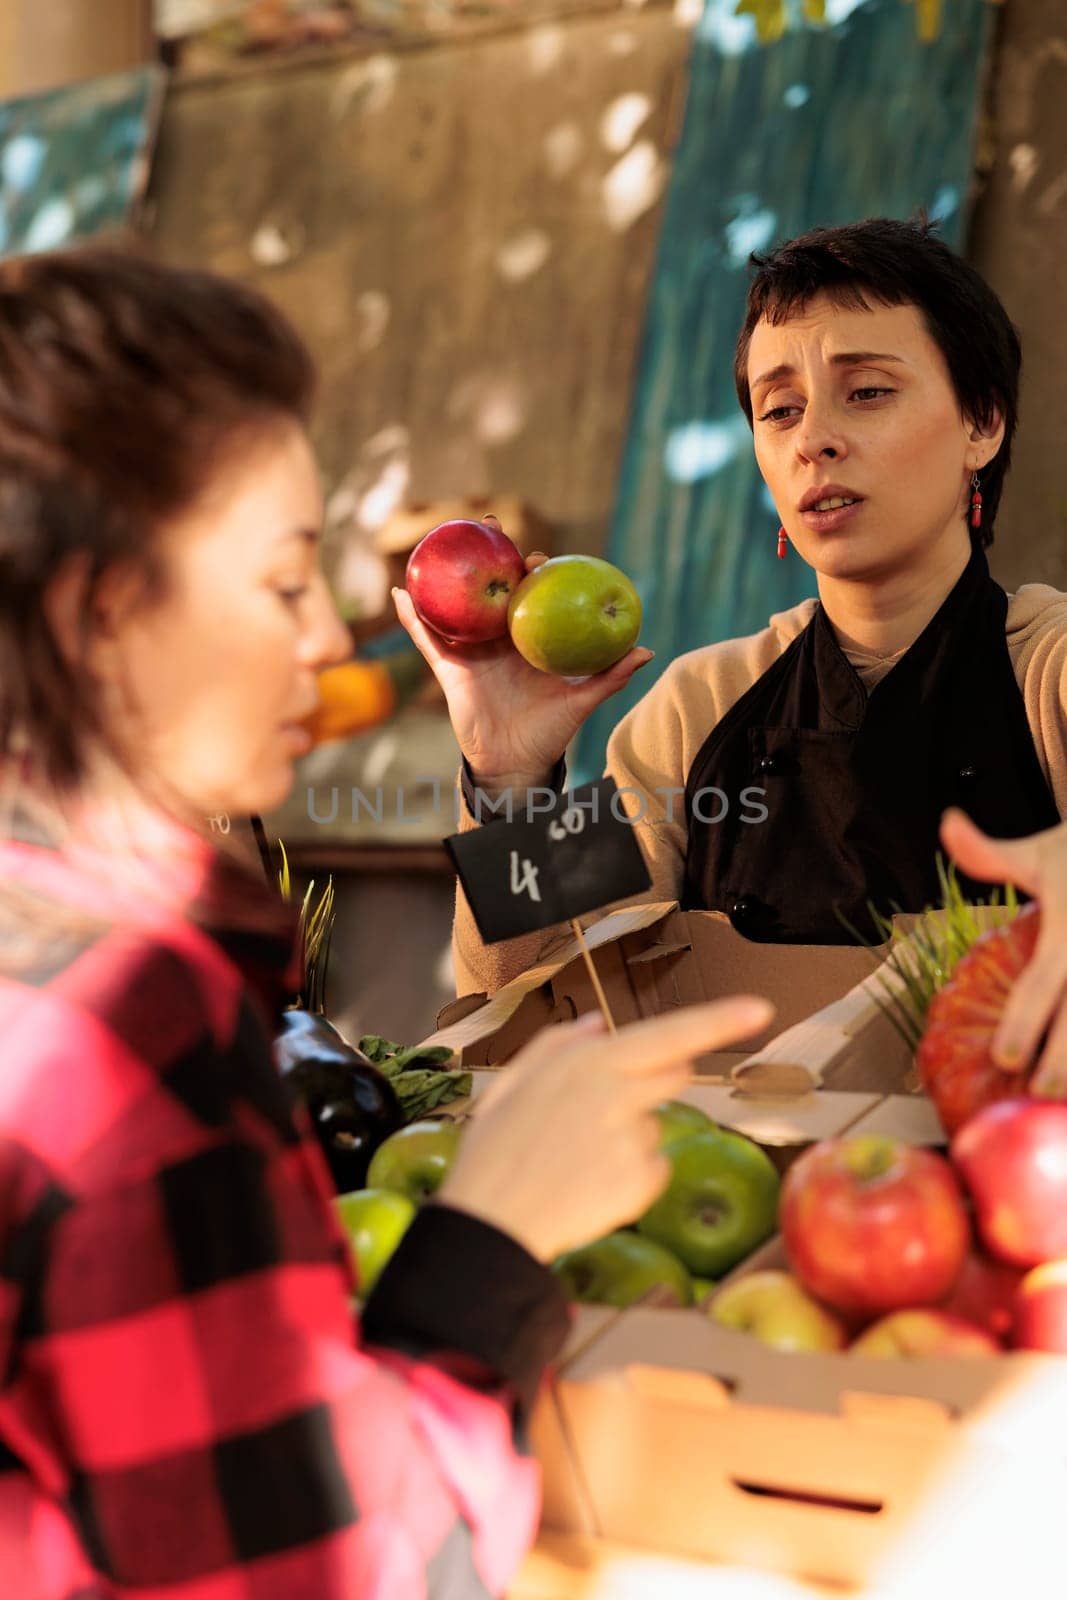 Group of women talking about local fresh farmers market produce, customer checking organic colorful fruits and veggies. Farmer and client meeting at food market stand, agricultural grocery shop.